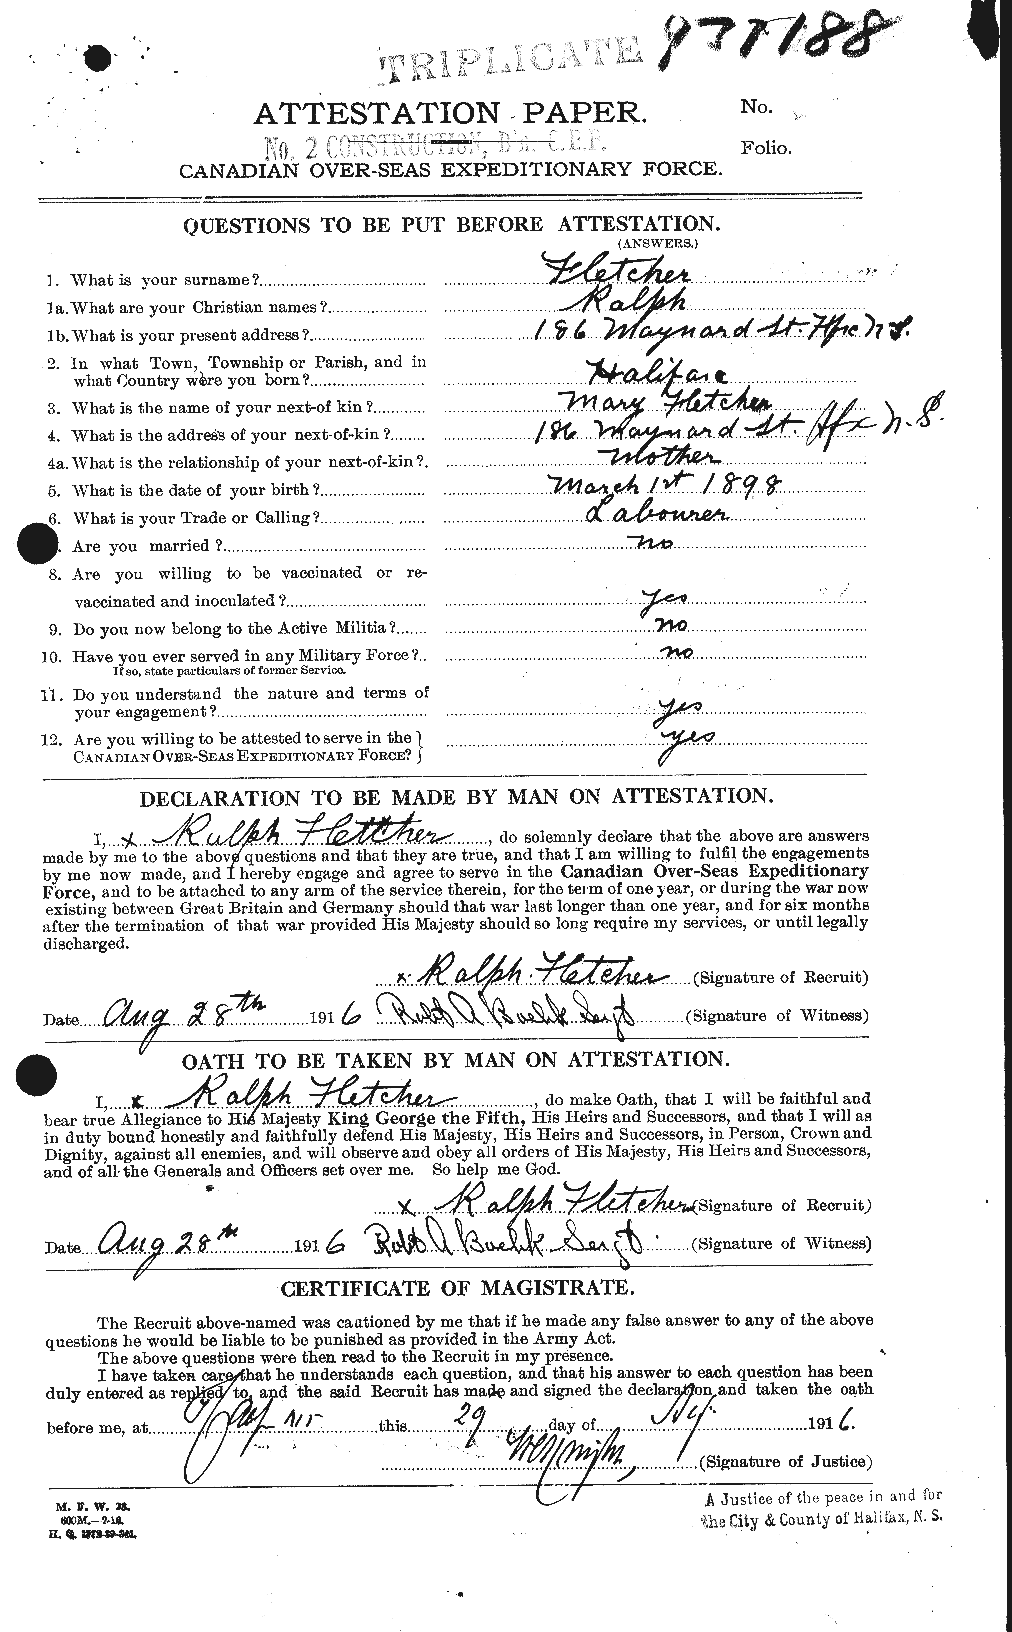 Personnel Records of the First World War - CEF 329029a